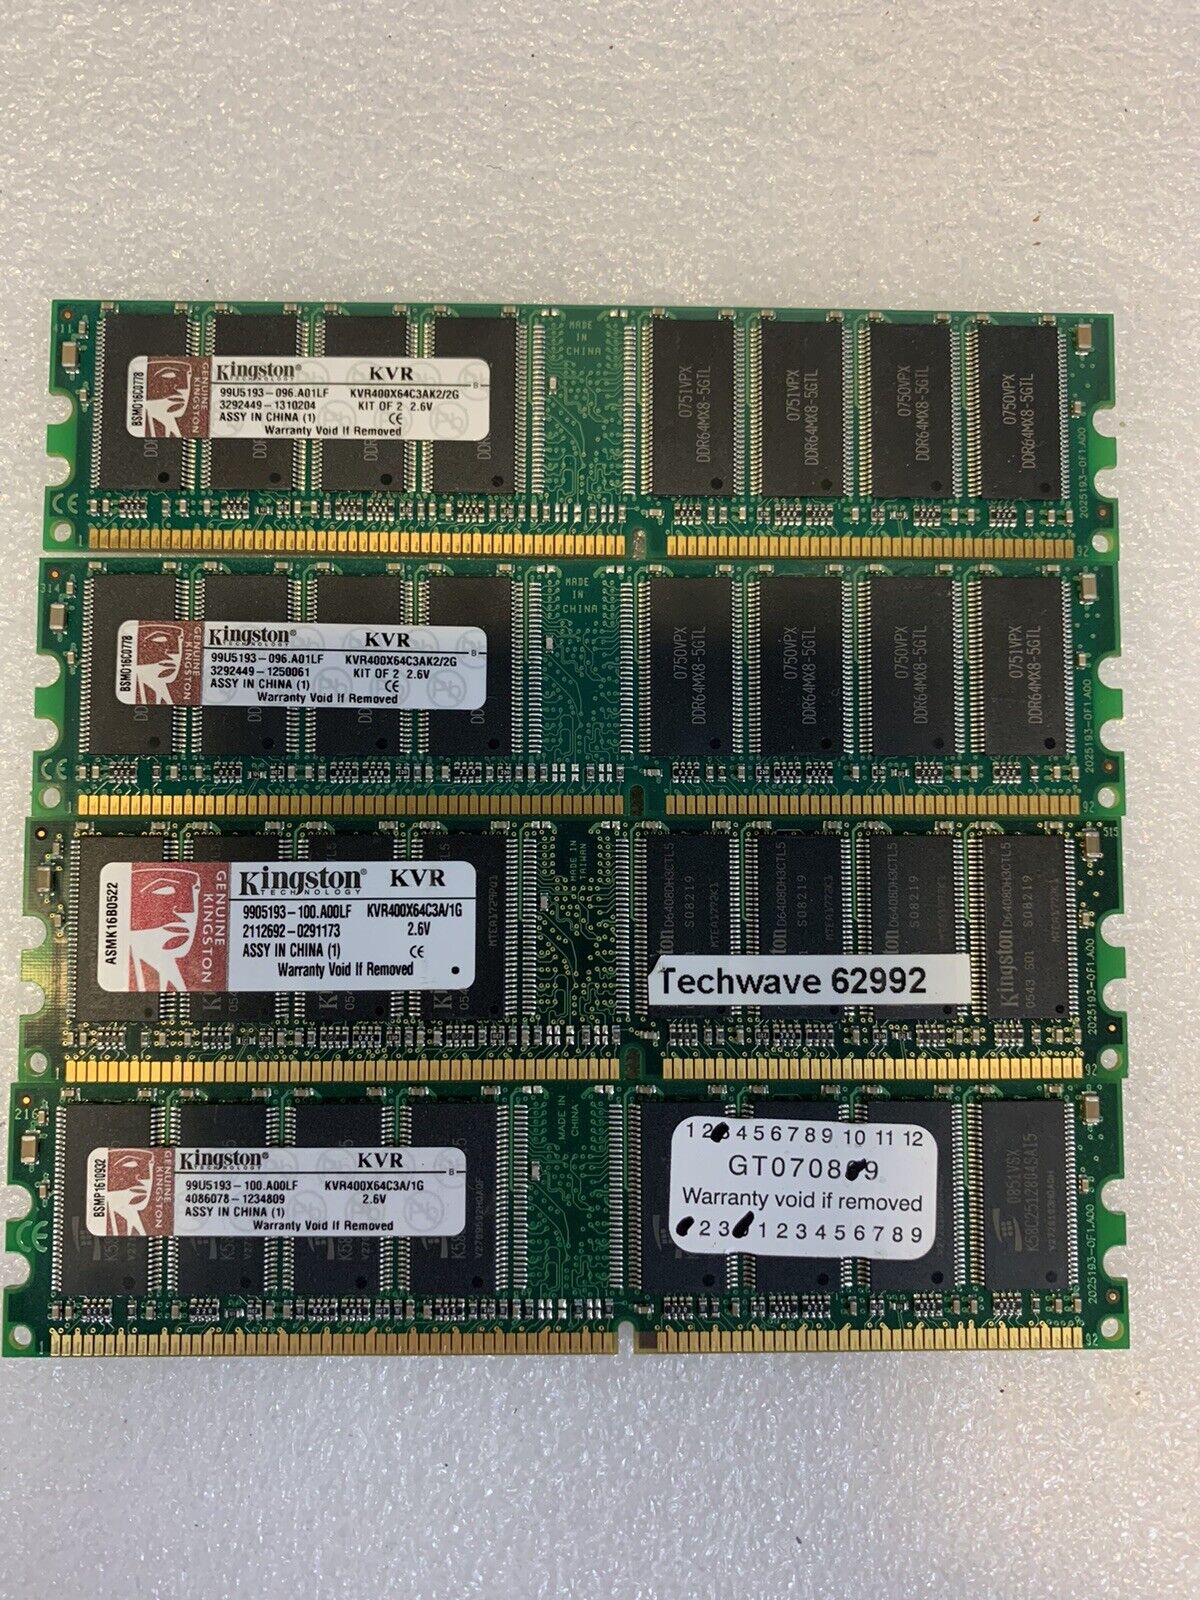 4x 1GB Kingston DDR1 PC3200 400MHZ Ram for vintage Apple G5 iMac and Power Mac